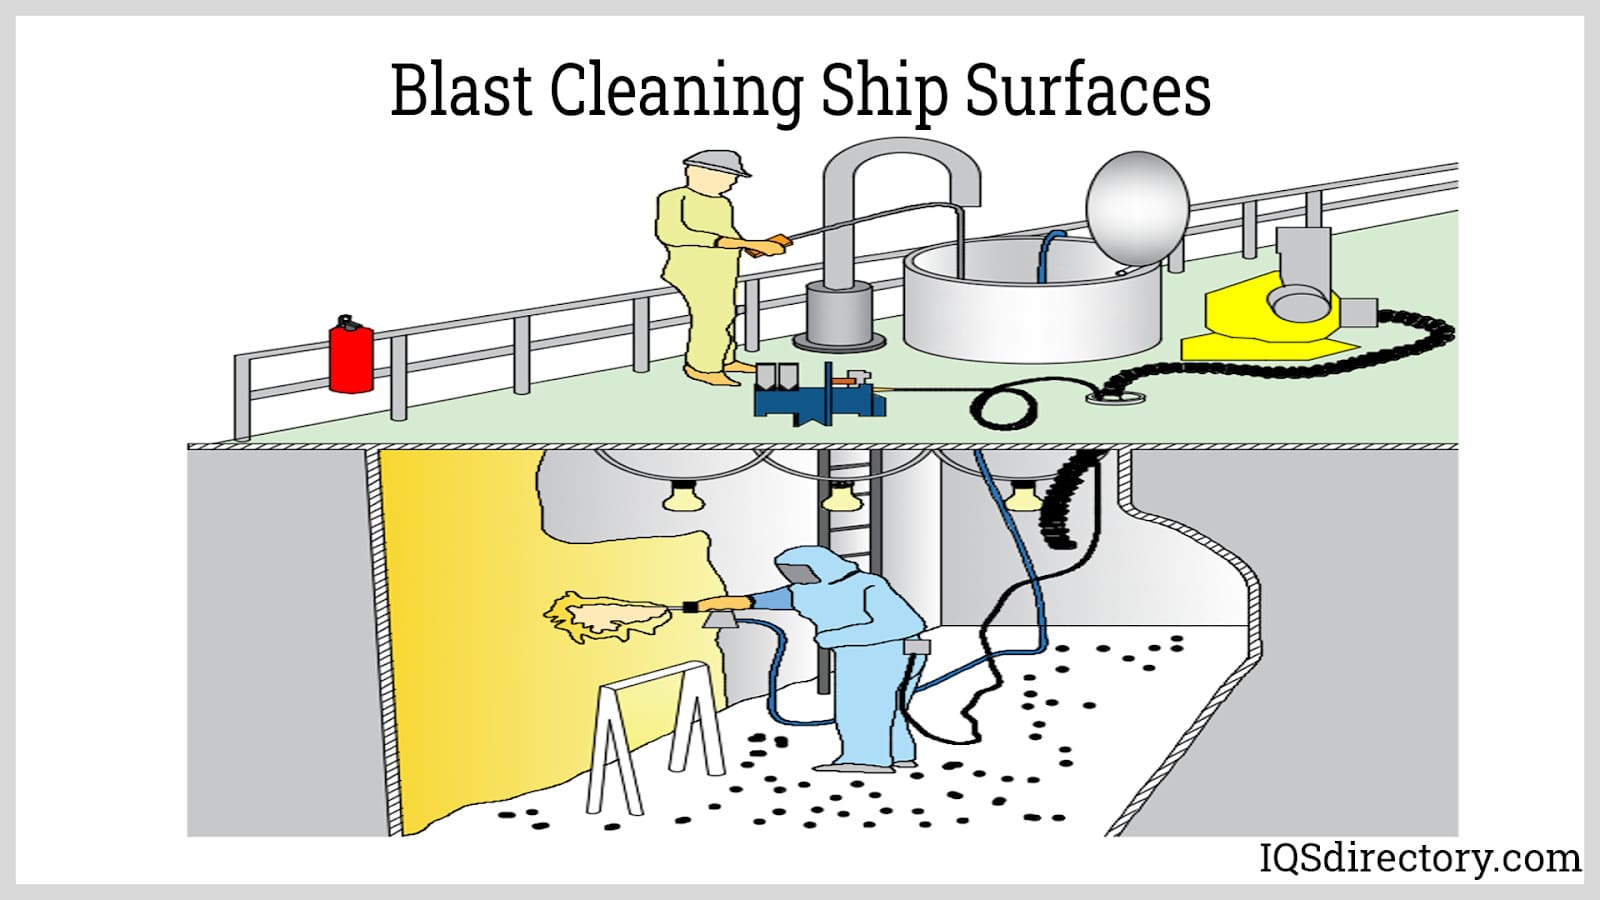 Blast Cleaning Ship Surfaces